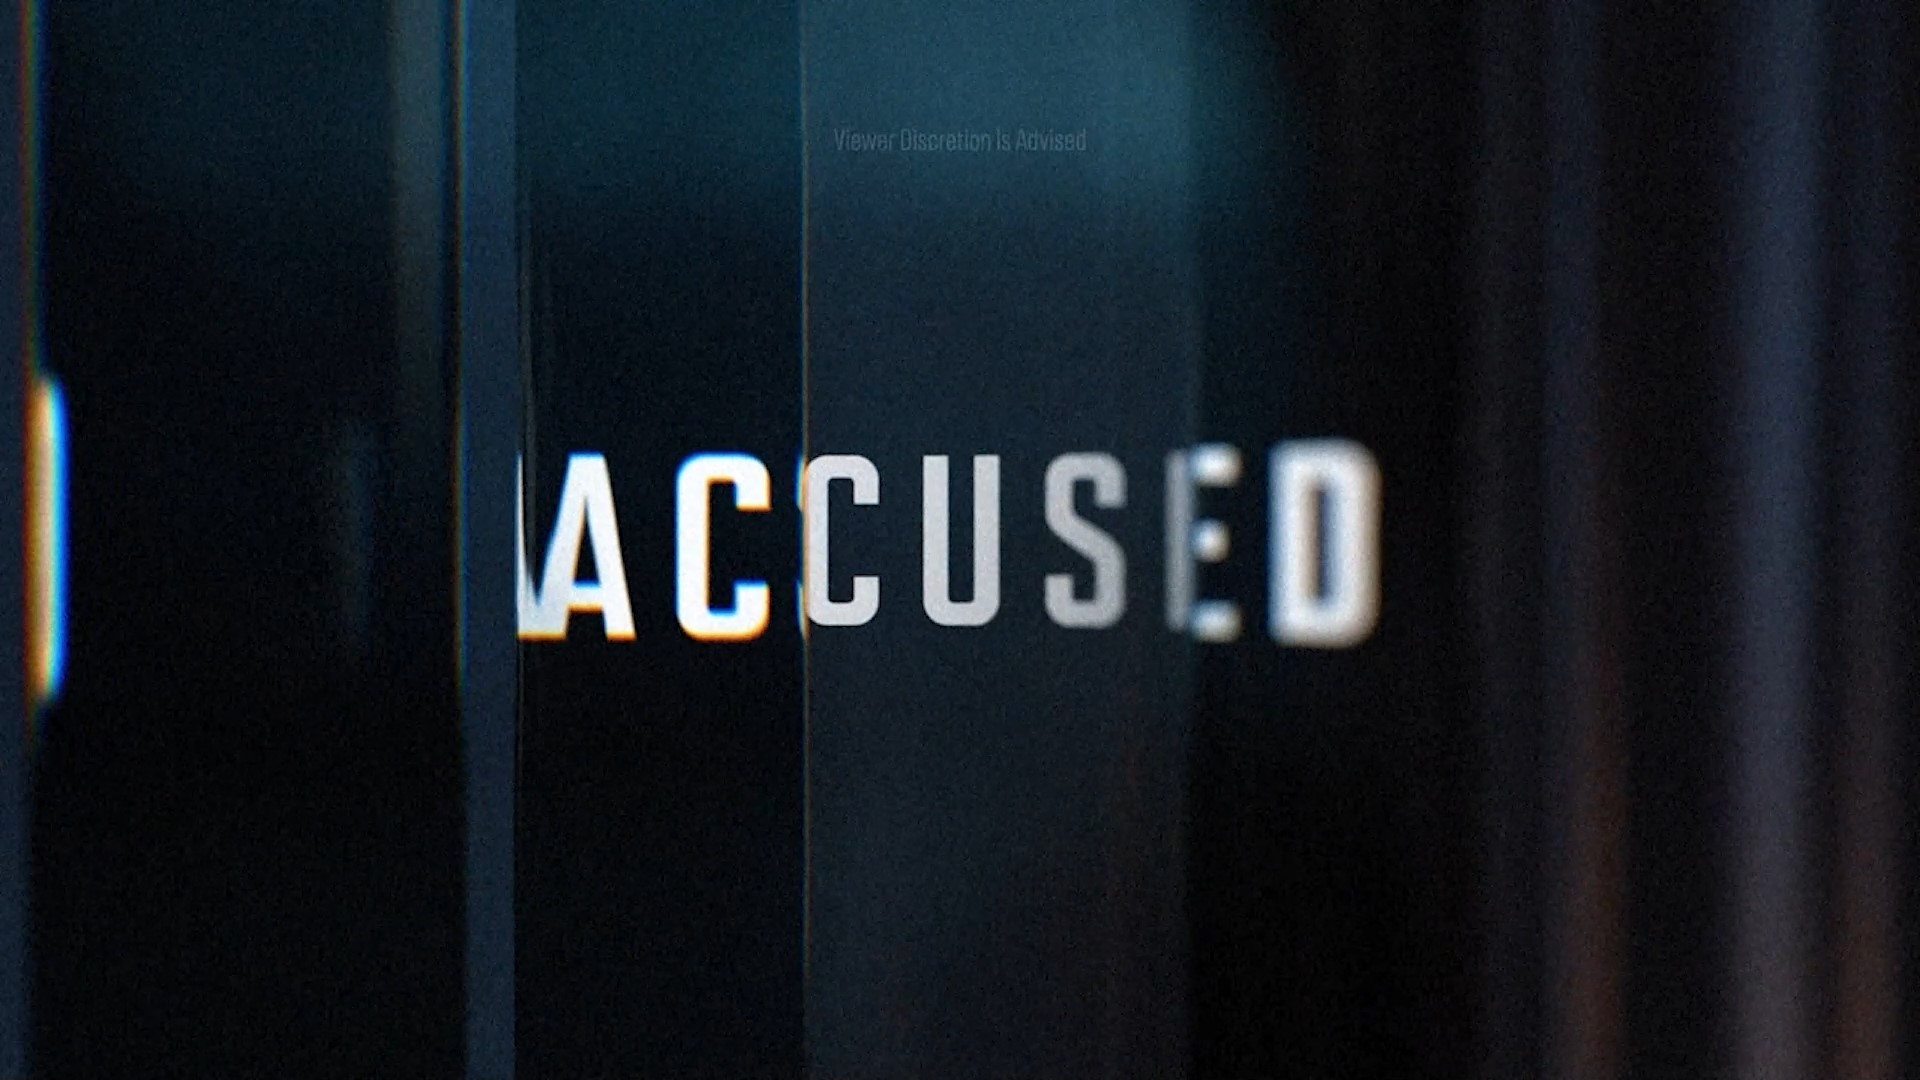 See a new series of mysteries as the hit anthology show ACCUSED returns with new episodes Nov. 1 on FOX54.